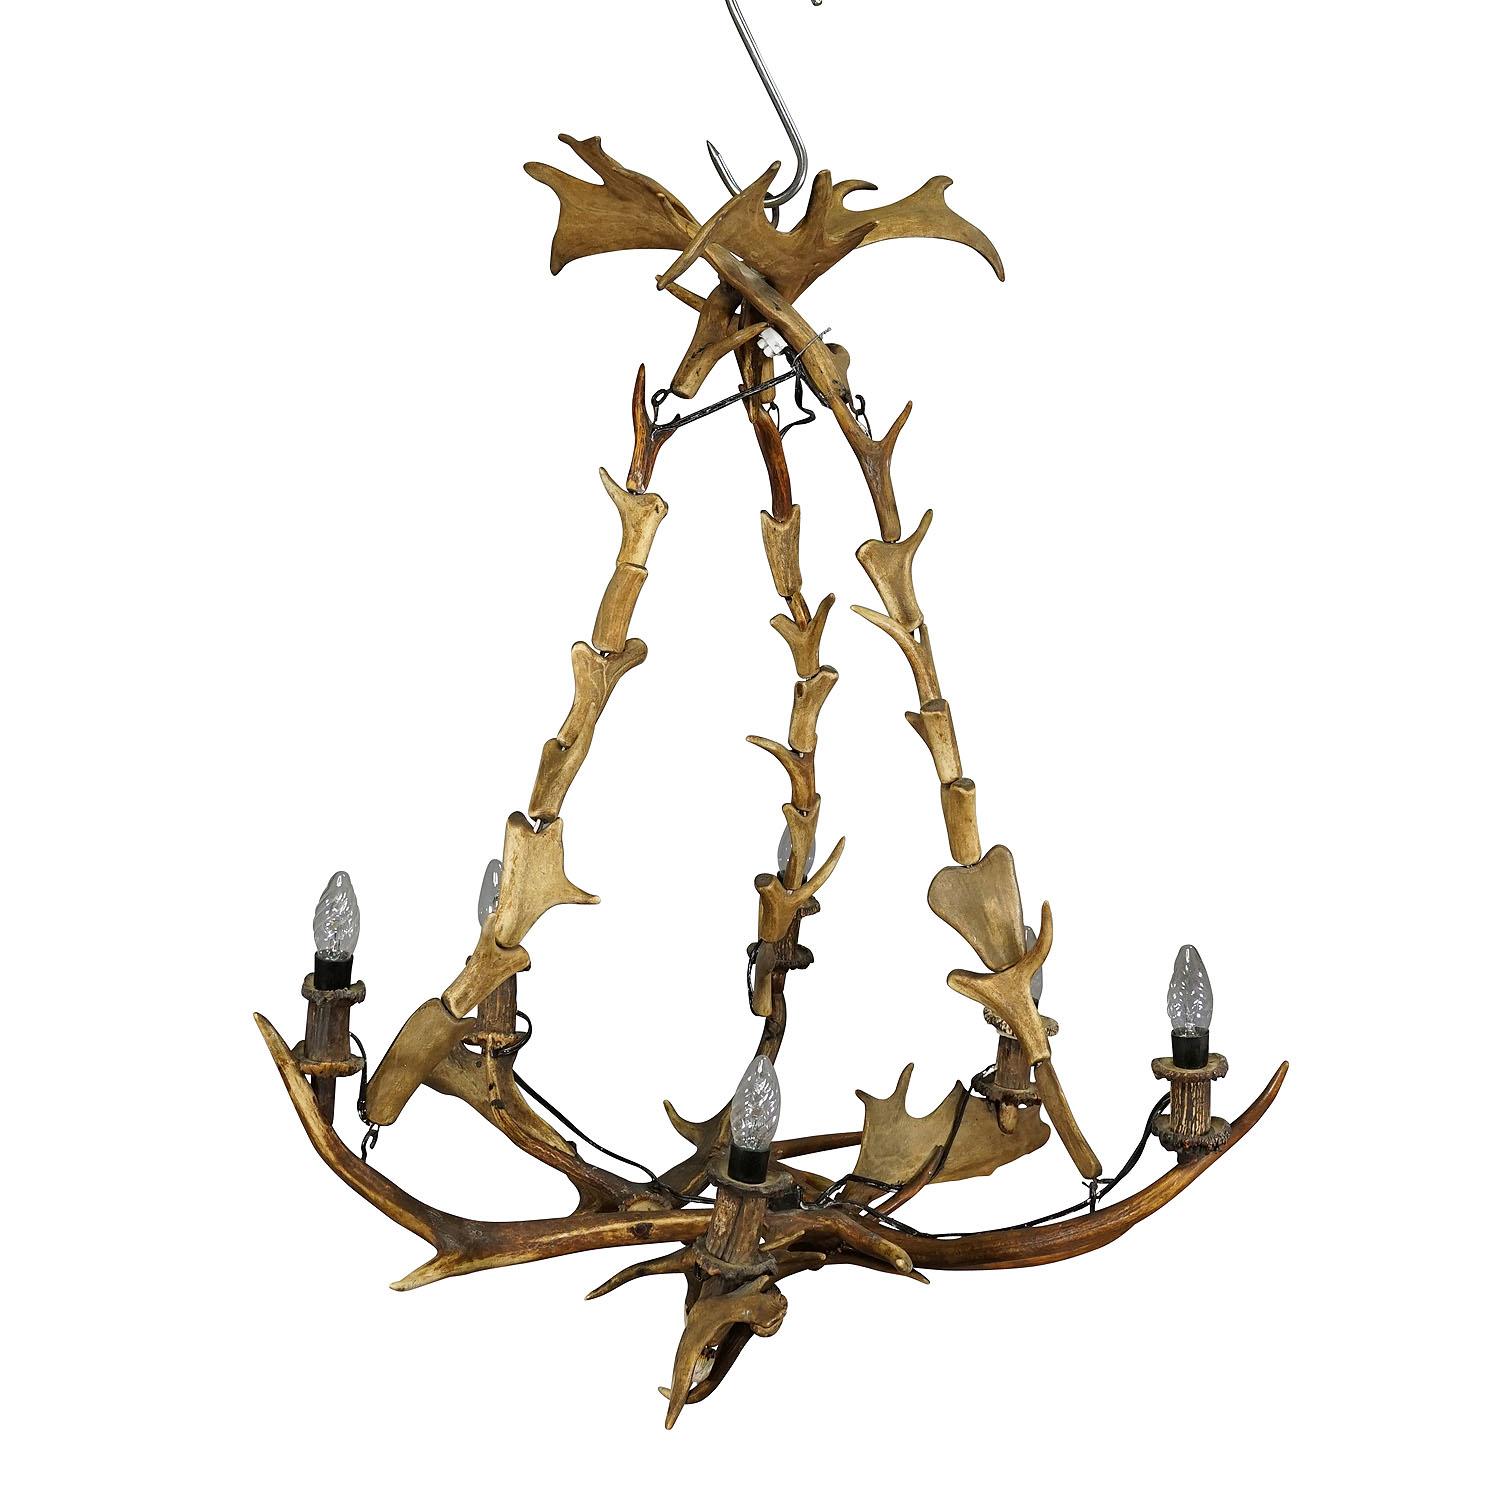 Large rustic antler lamp with fallow deer and deer antlers

A large antler chandelier composed of several joined fallow deer and deer antlers. The lamp comes with 6 electrified spouts made of turned horn roses. Manufactured in Germany ca. 1900.